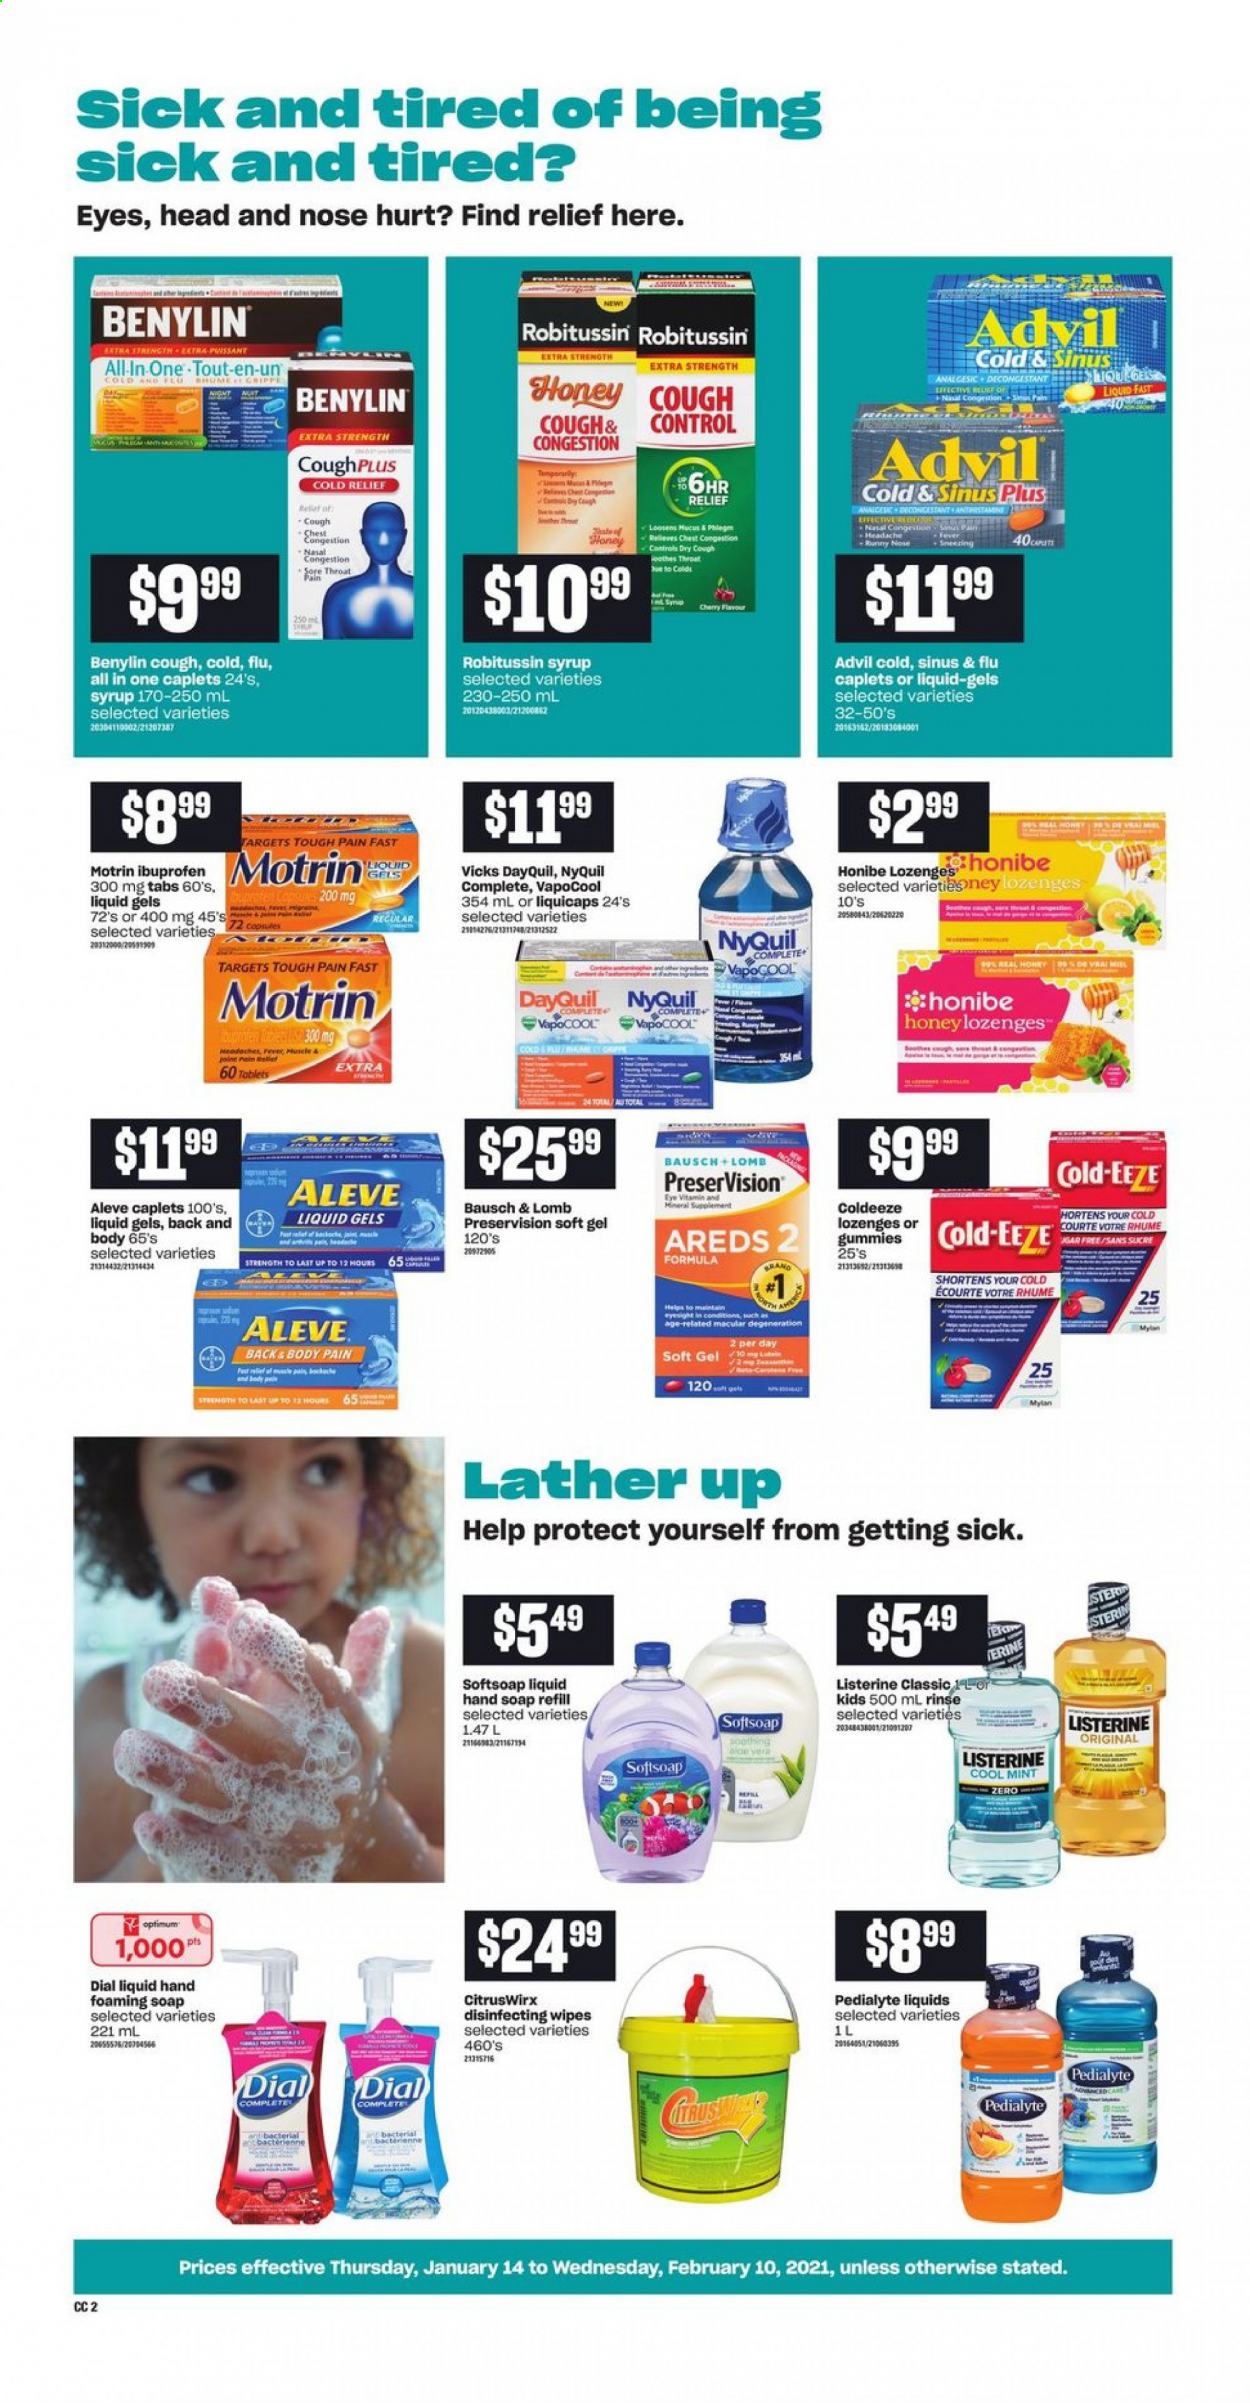 thumbnail - Atlantic Superstore Flyer - January 14, 2021 - February 10, 2021 - Sales products - honey, syrup, wipes, Softsoap, hand soap, Dial, soap, Vicks, Optimum, Aleve, DayQuil, Ibuprofen, NyQuil, Advil Rapid, Benylin, Motrin, Listerine, Robitussin. Page 2.